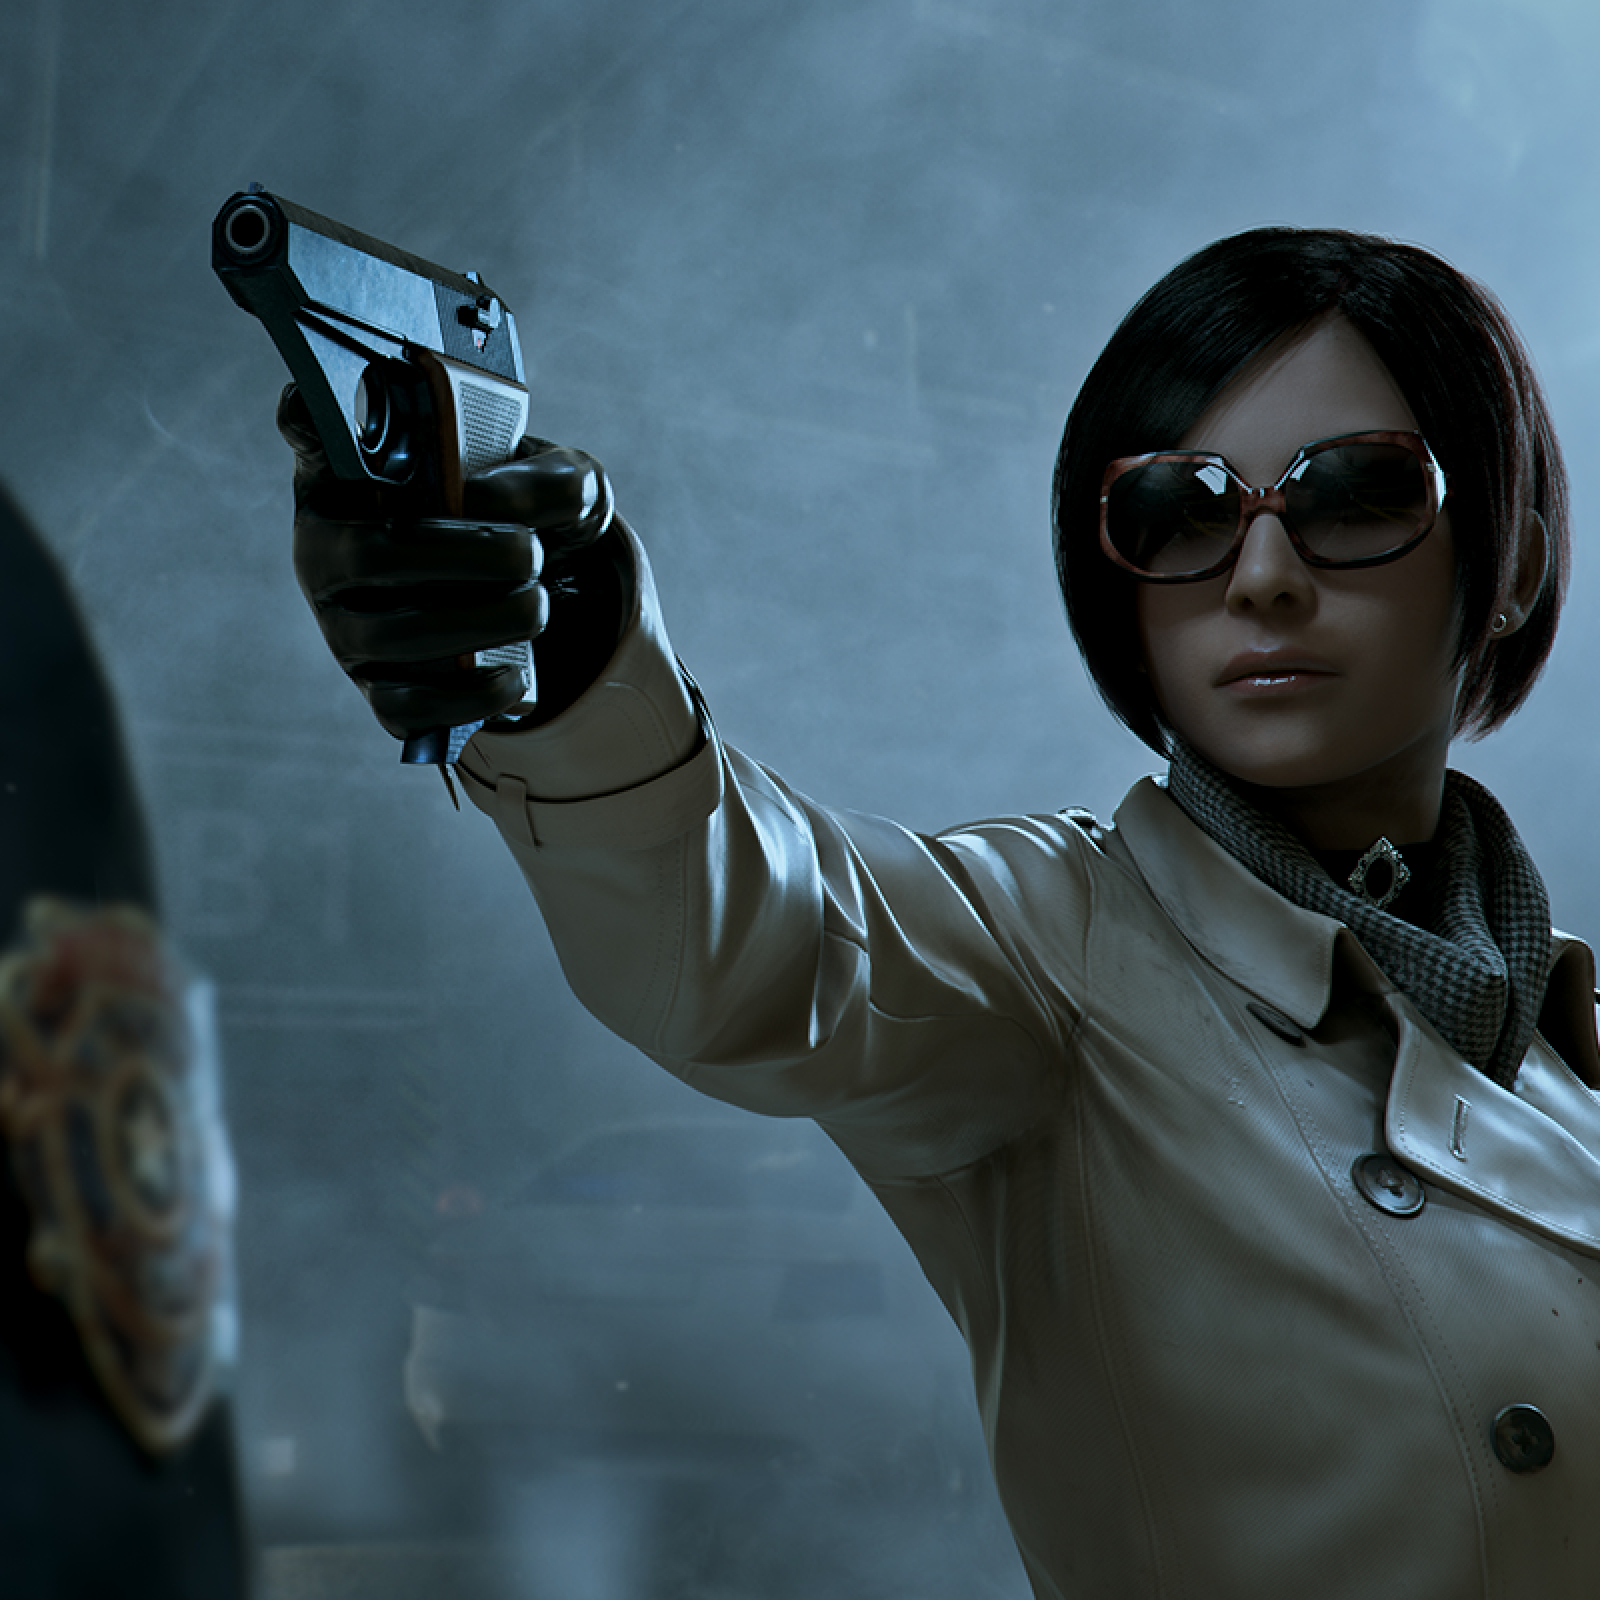 Will Ada Wong Appear in 'Resident Evil' Season 2 After Major Finale Reveal?